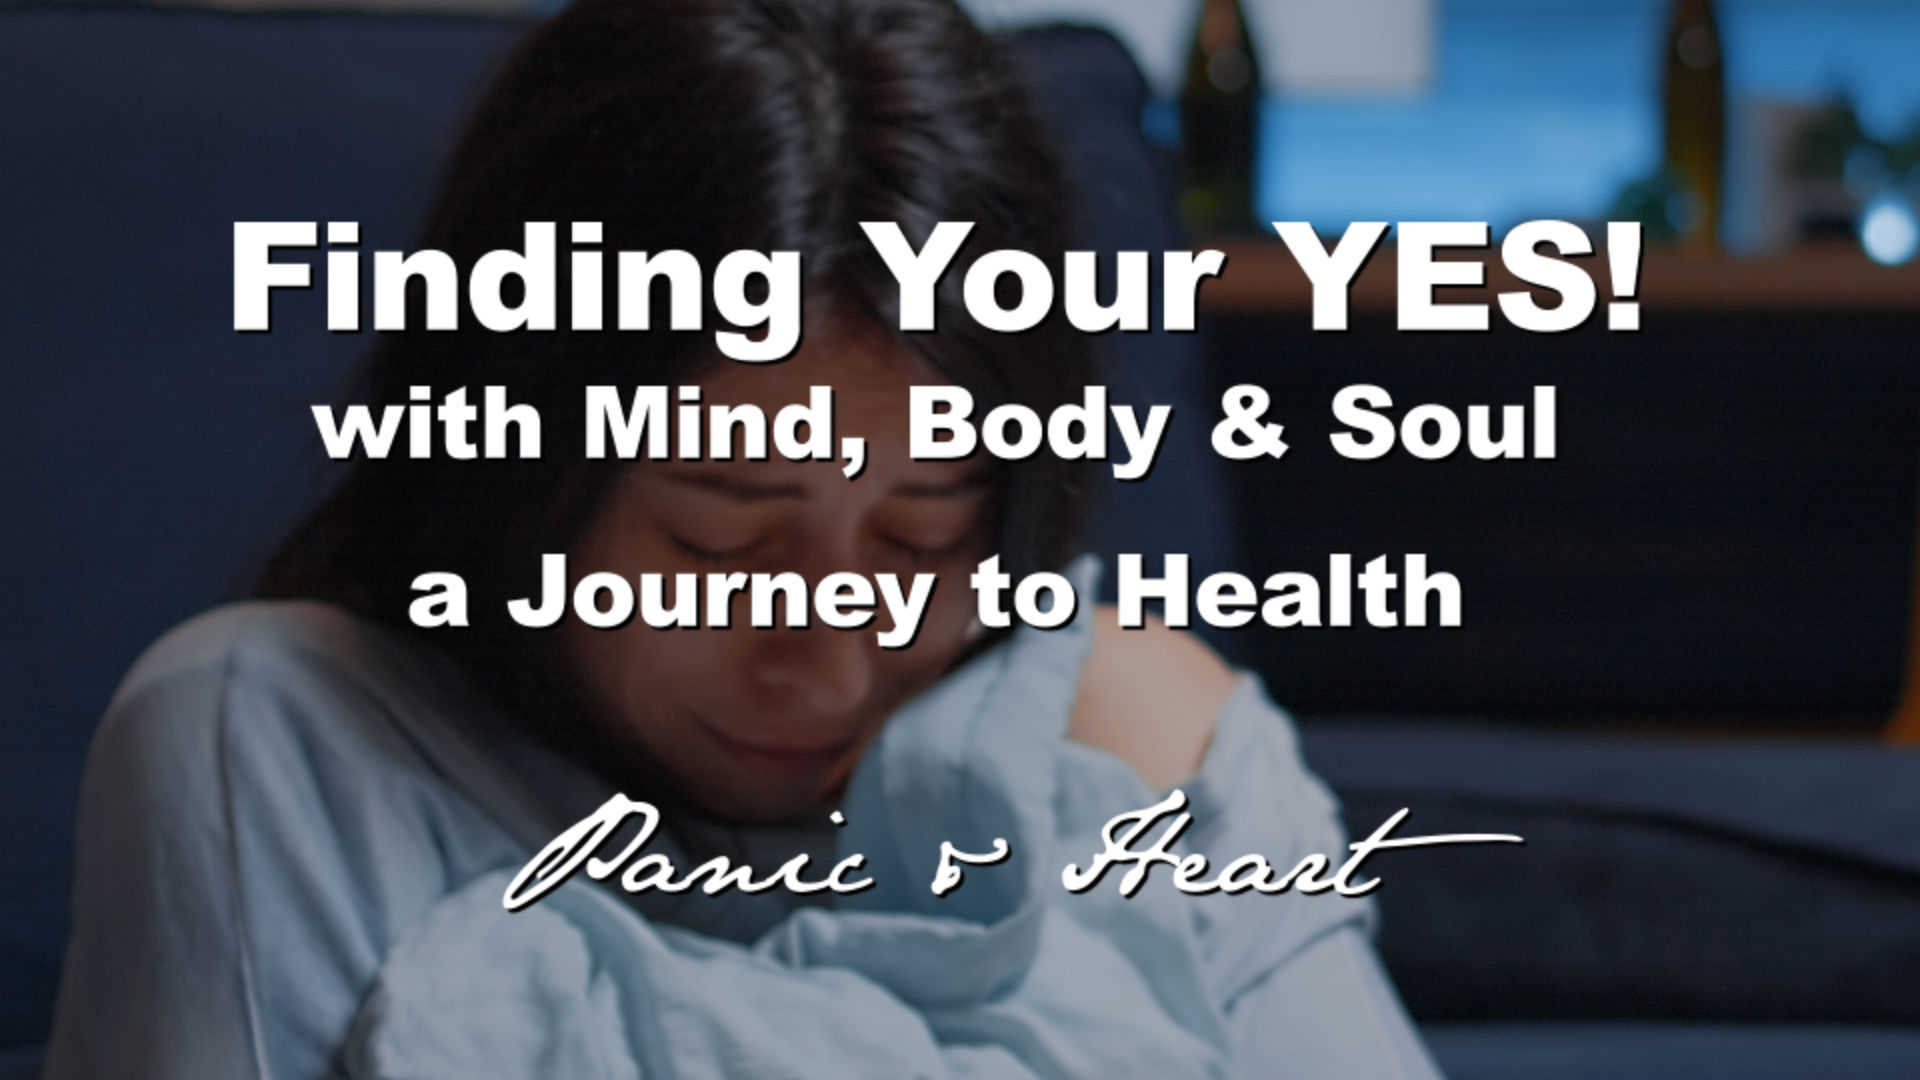 Finding Your YES! "Panic & Heart"